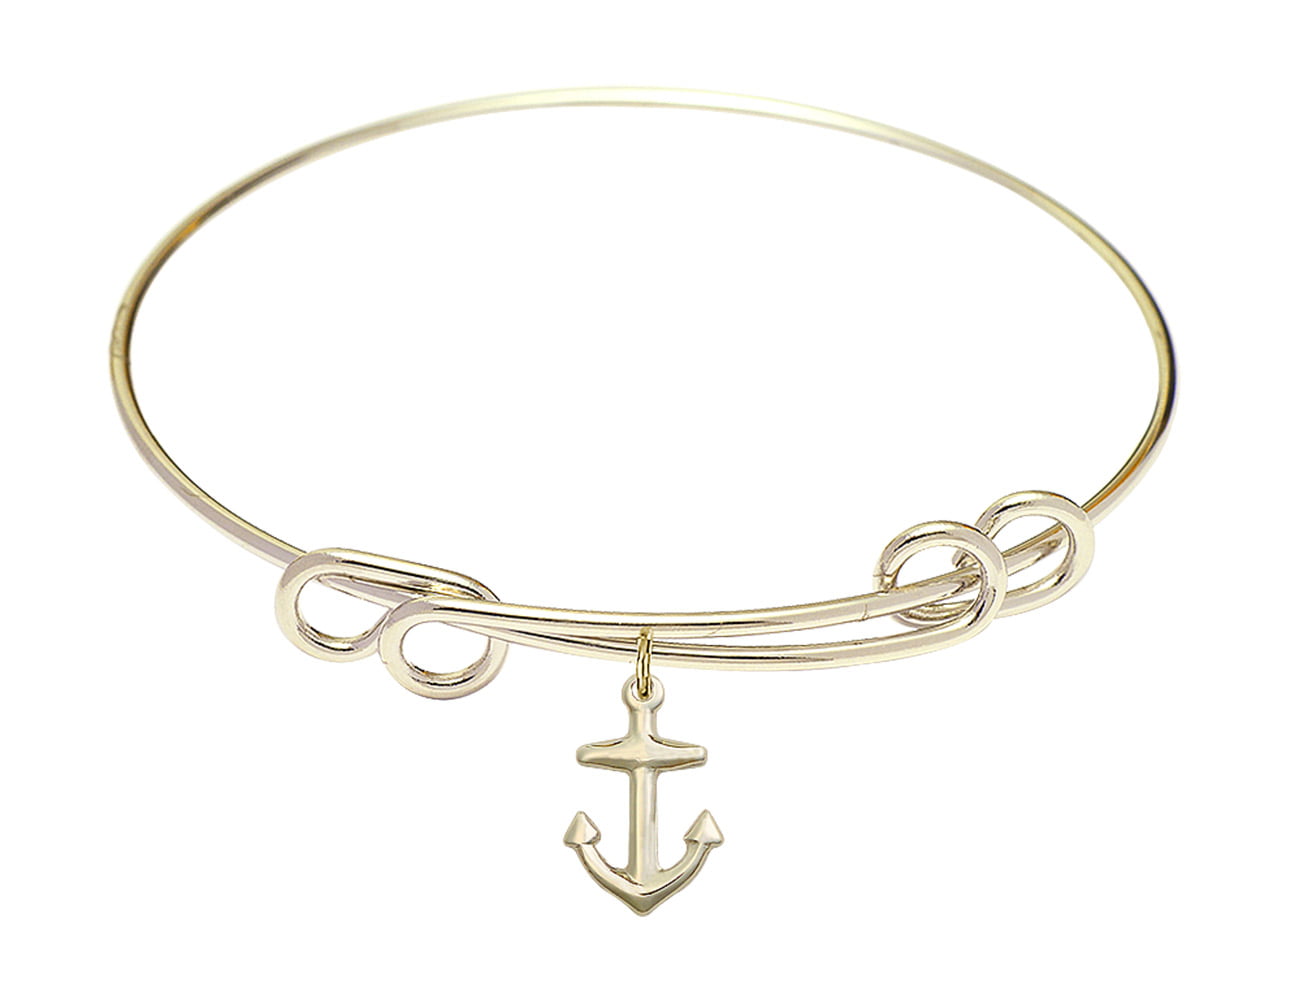 Anchor Charm On A 7 1/2 Inch Round Double Loop Bangle Bracelet